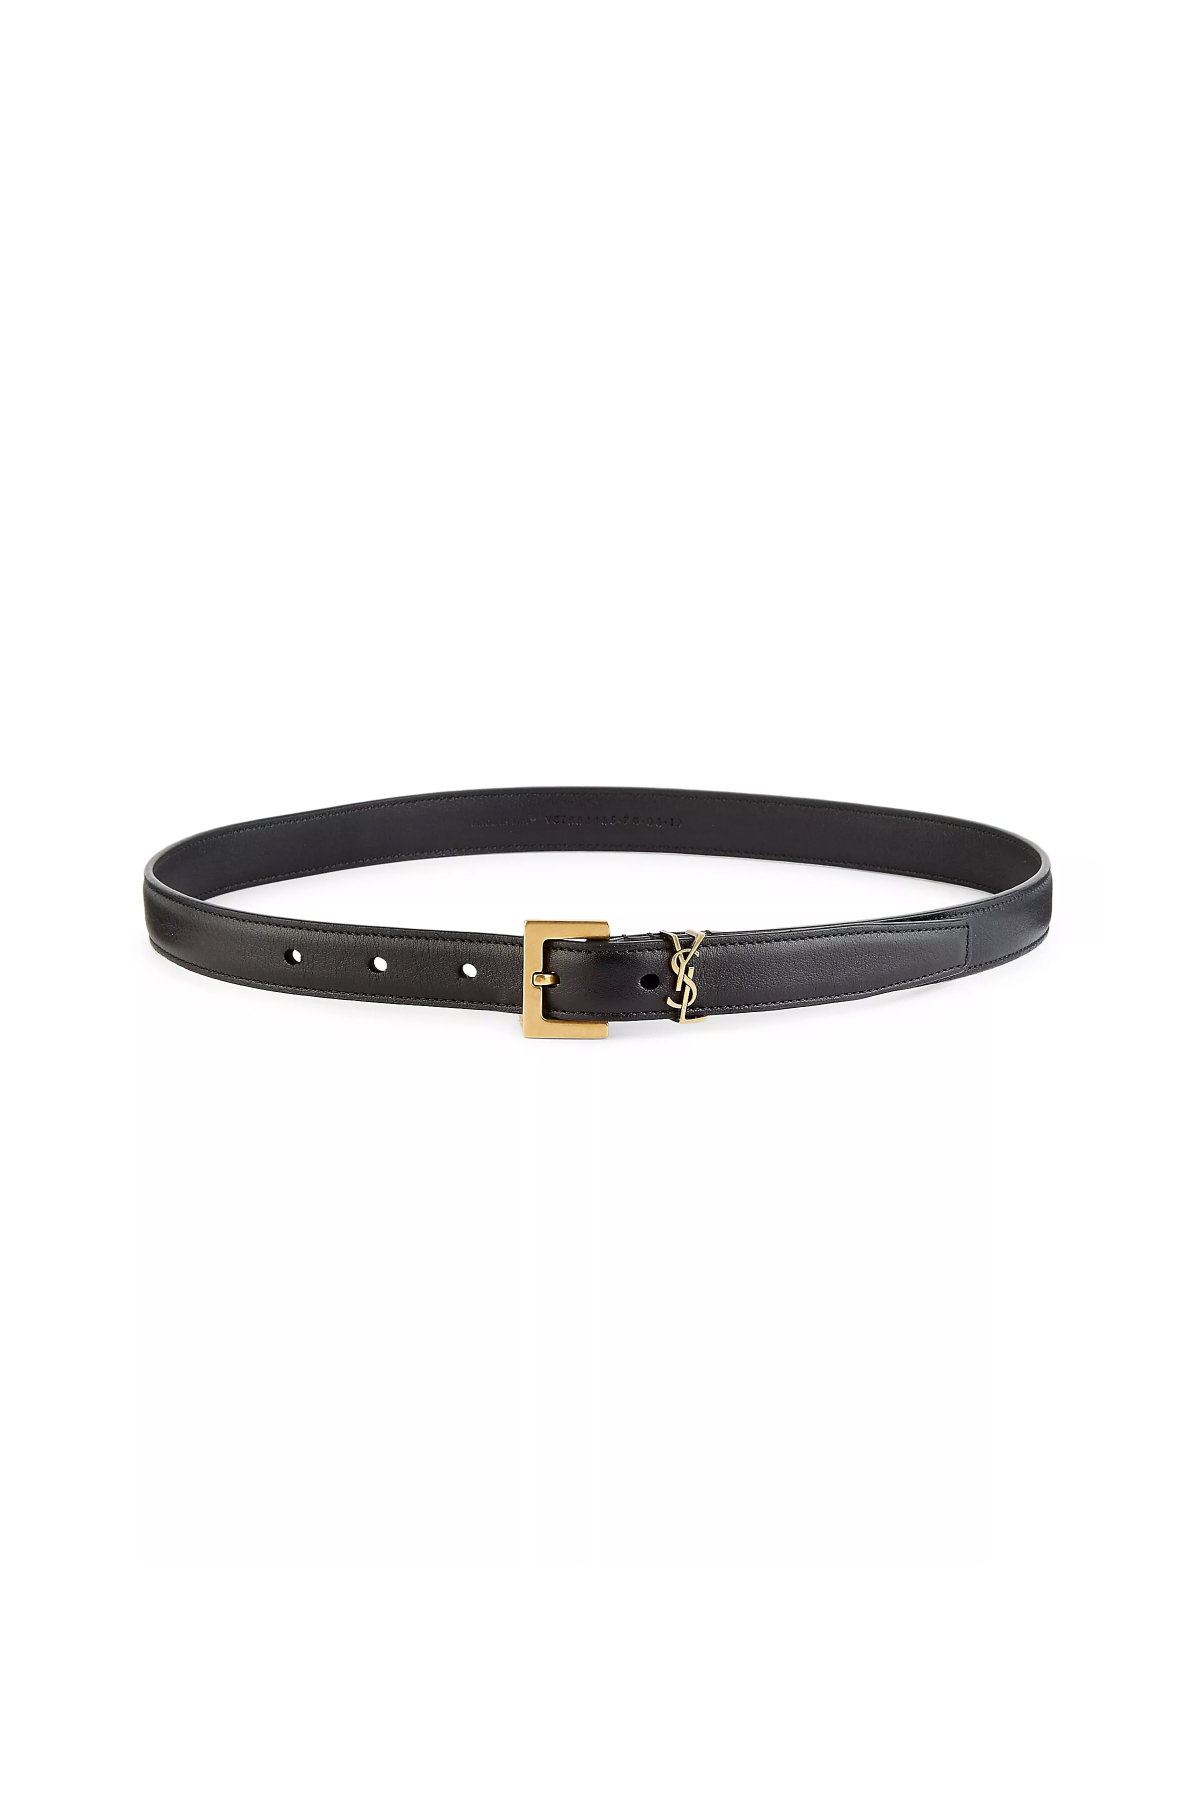 Saint Laurent Cassandre Thin Belt With Square Buckle in Grained Leather